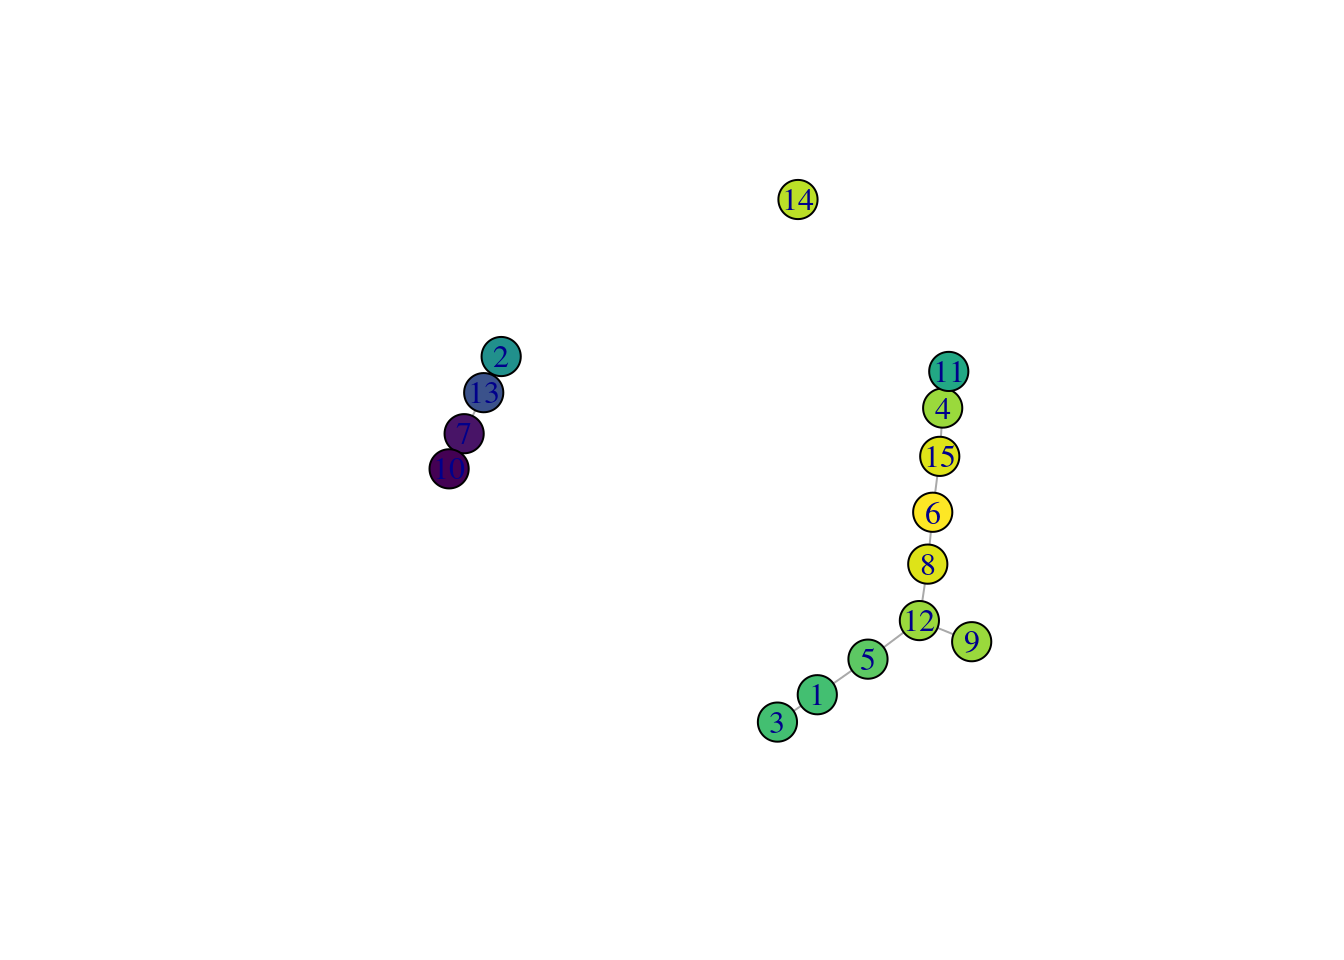 _TSCAN_-derived MST created from the Hermann spermatogenesis dataset. Each node is a cluster and is colored by the average velocity pseudotime of all cells in that cluster, from lowest (purple) to highest (yellow).